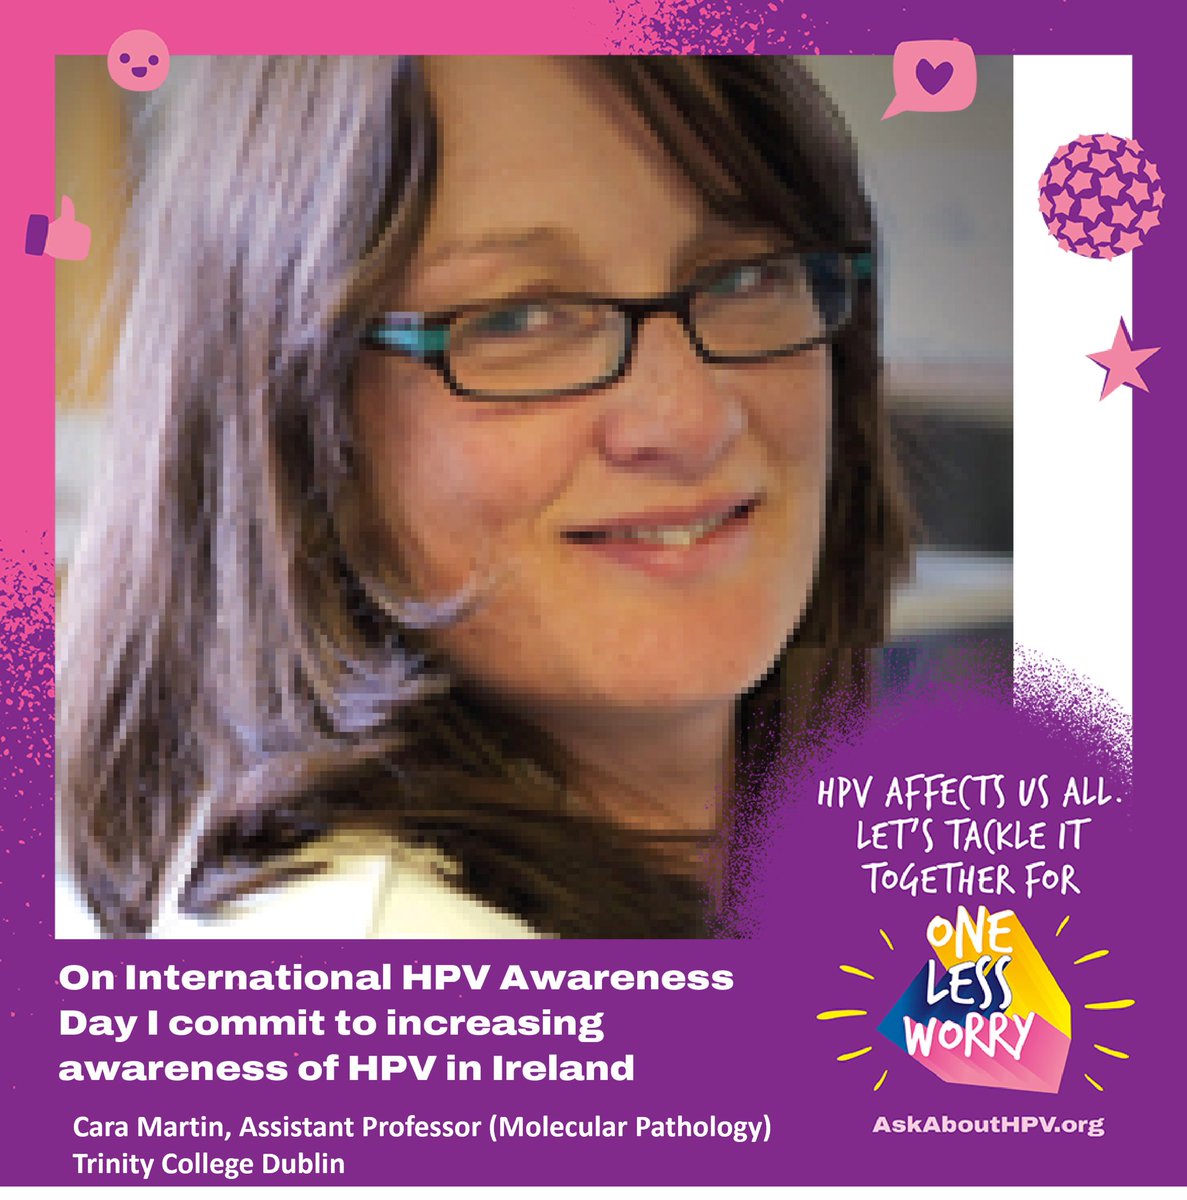 On this International HPV Awareness day remember our goal to eliminate cervical cancer in Ireland by 2040 . This can be achieved by HPV vaccination, cervical screening and early treatment. #onelessworry